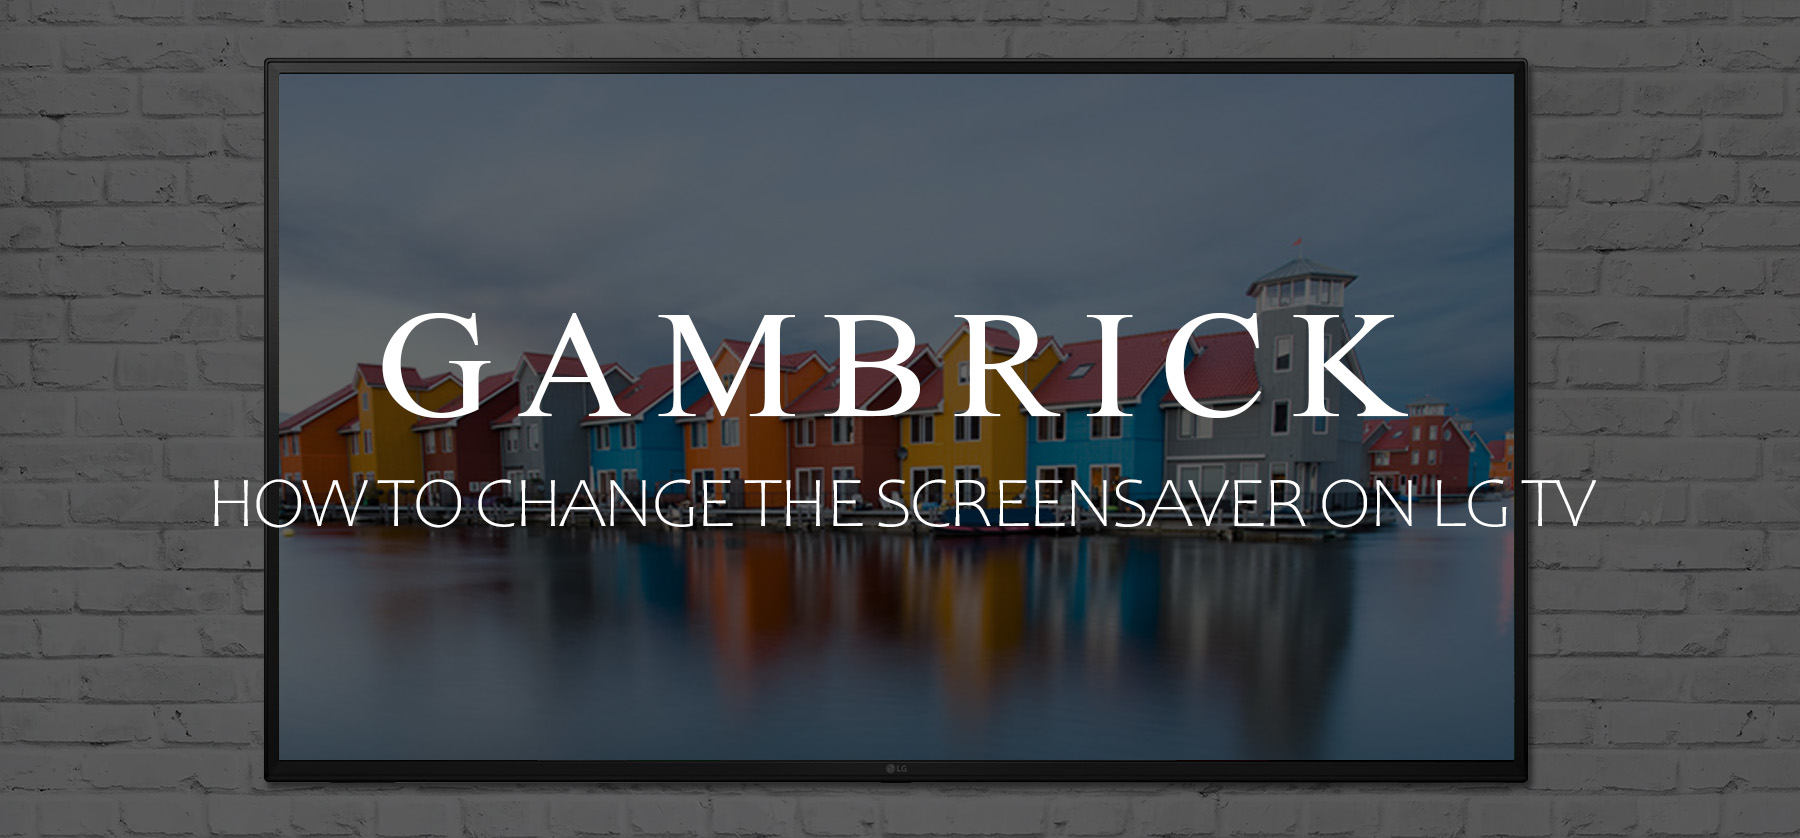 how to change the screensaver on LG TV banner 1.0